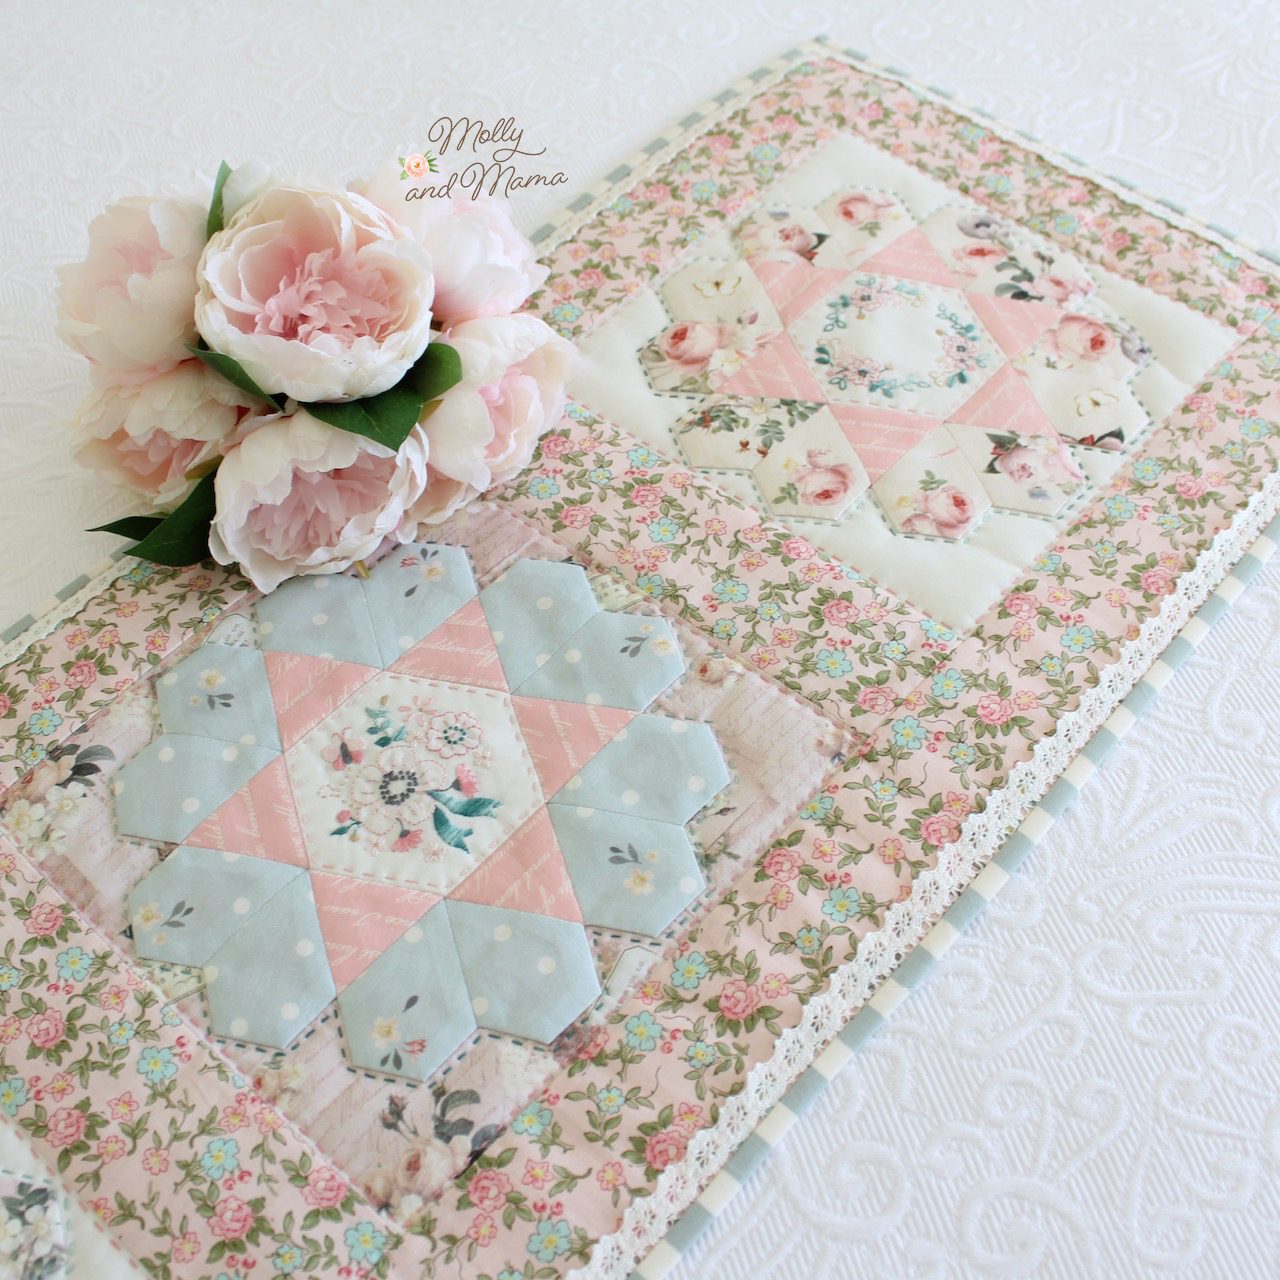 Introducing the Tilly’s Tea Party Table Runner